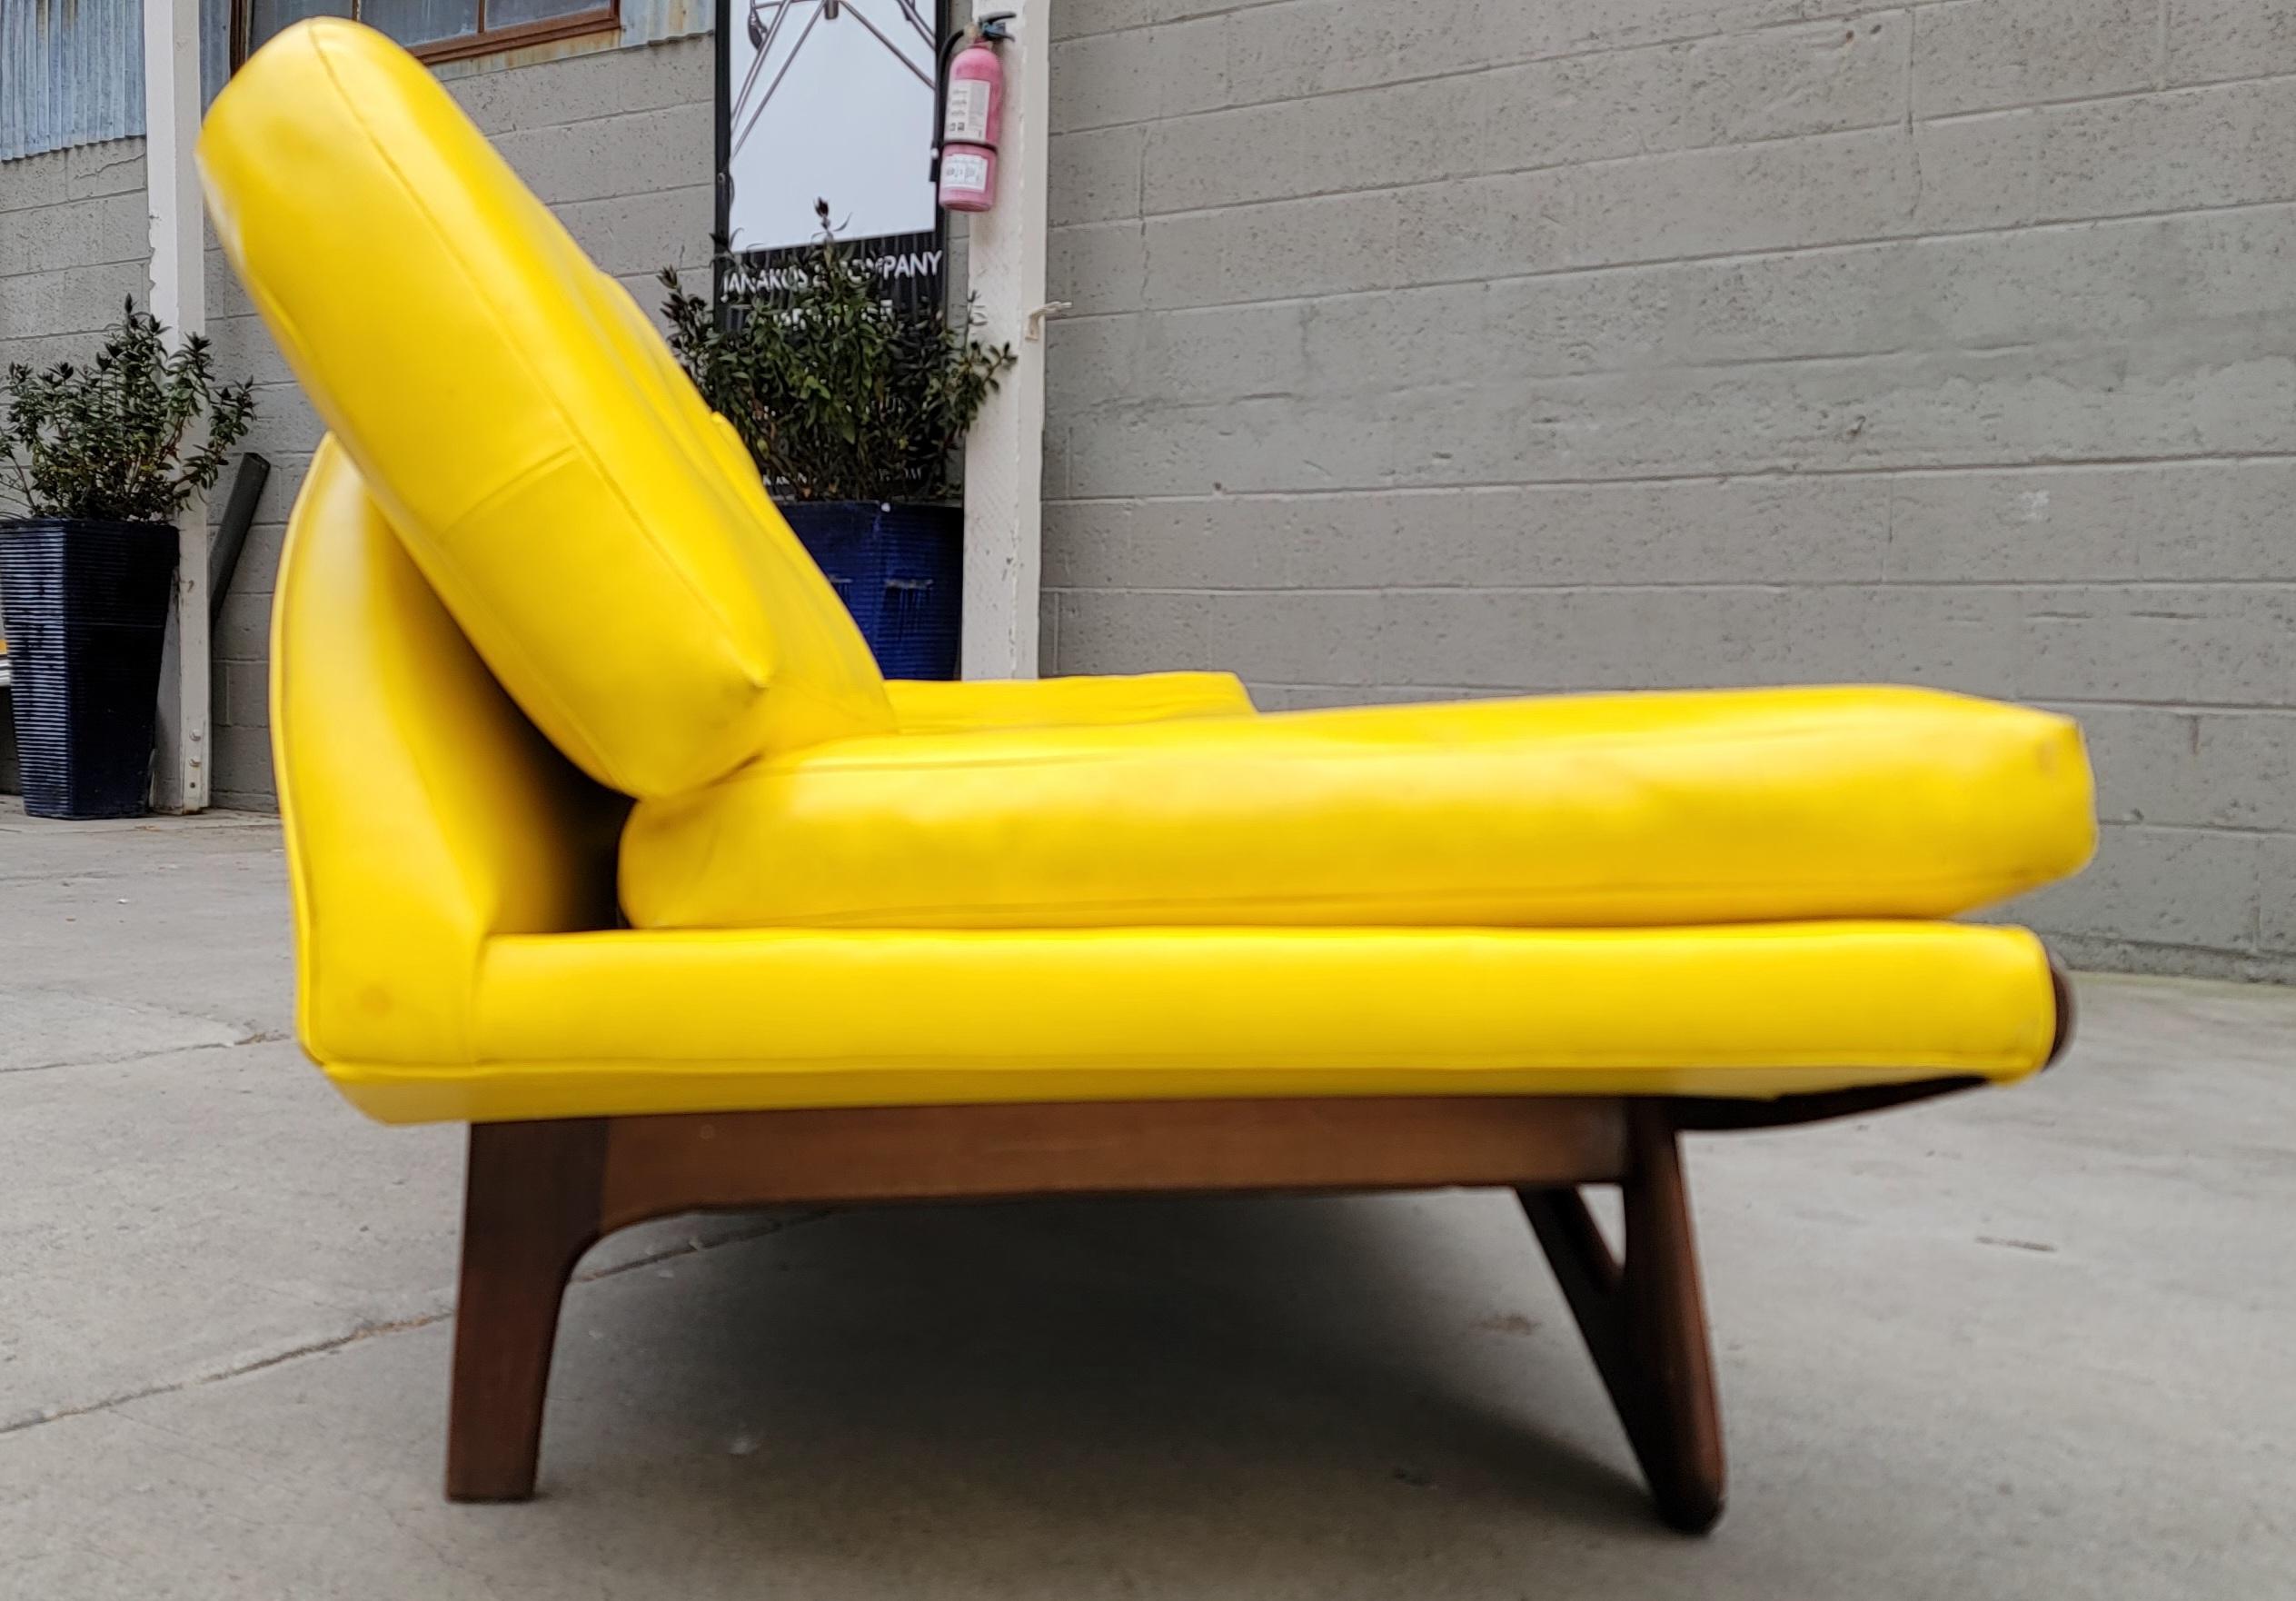 Authentic Adrian Pearsall for Craft Associates Gondola sofa. Circa. 1950's. Solid walnut frame in fine original condition with original finish. Very sturdy. Iconic Mid-Century Modern design. Older re-upholstery in yellow vinyl is worn, new